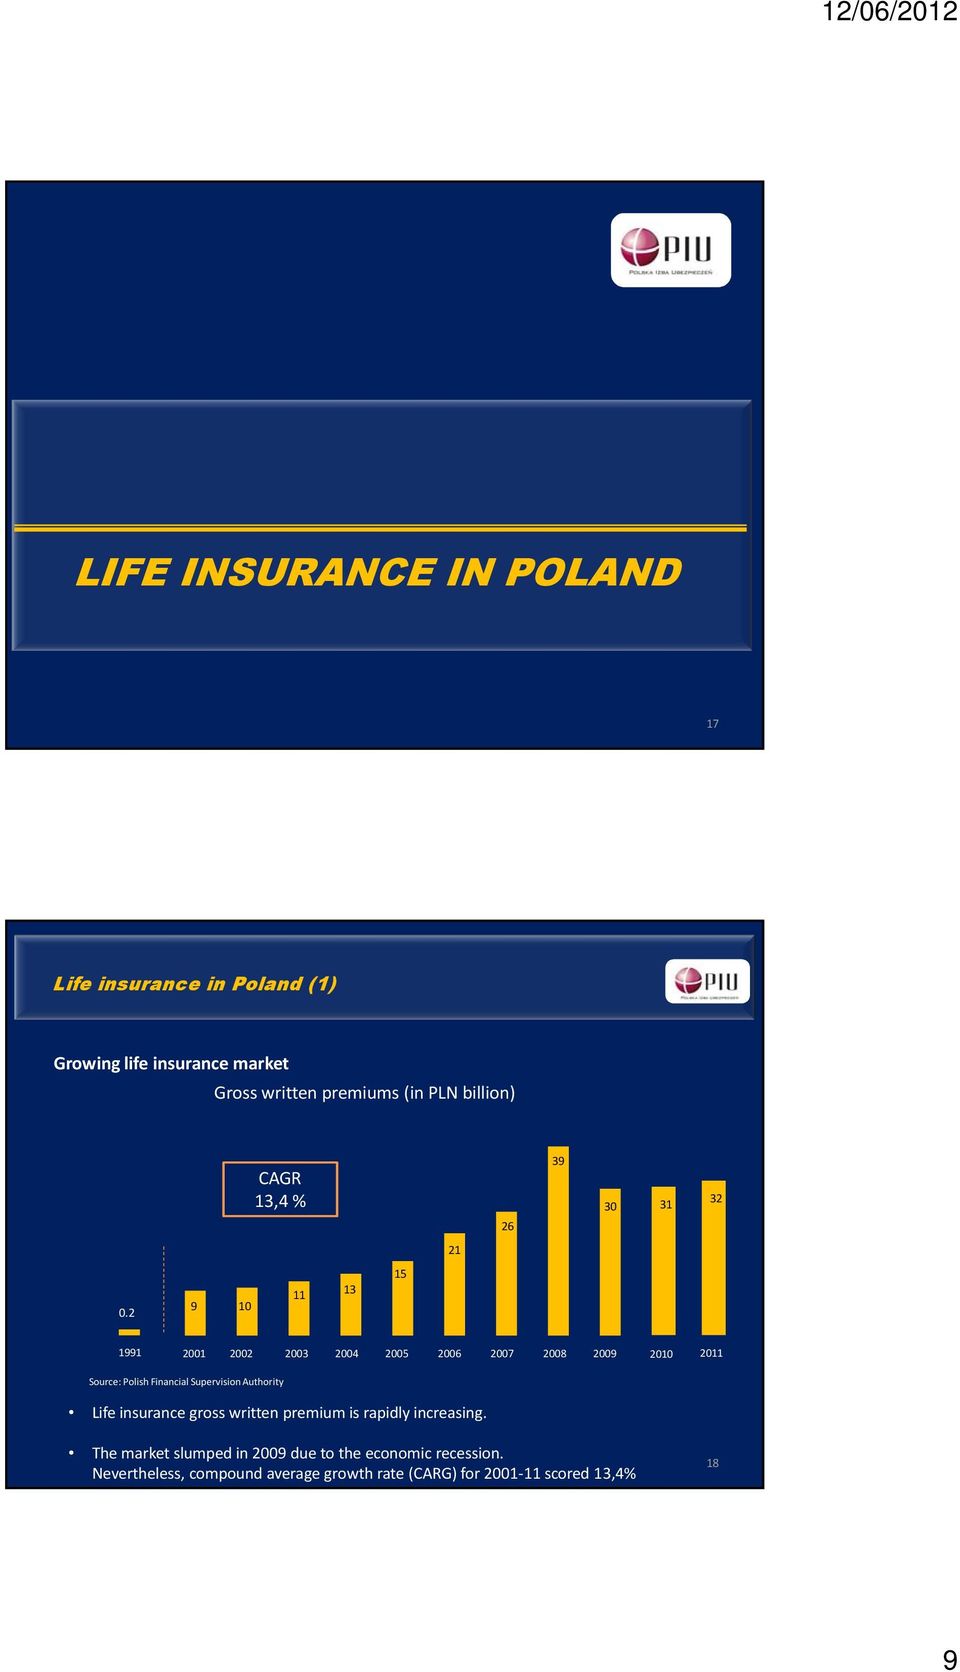 2 9 10 11 13 15 1991 2001 2002 2003 2004 2005 2006 2007 2008 2009 2010 2011 Source: Polish Financial Supervision